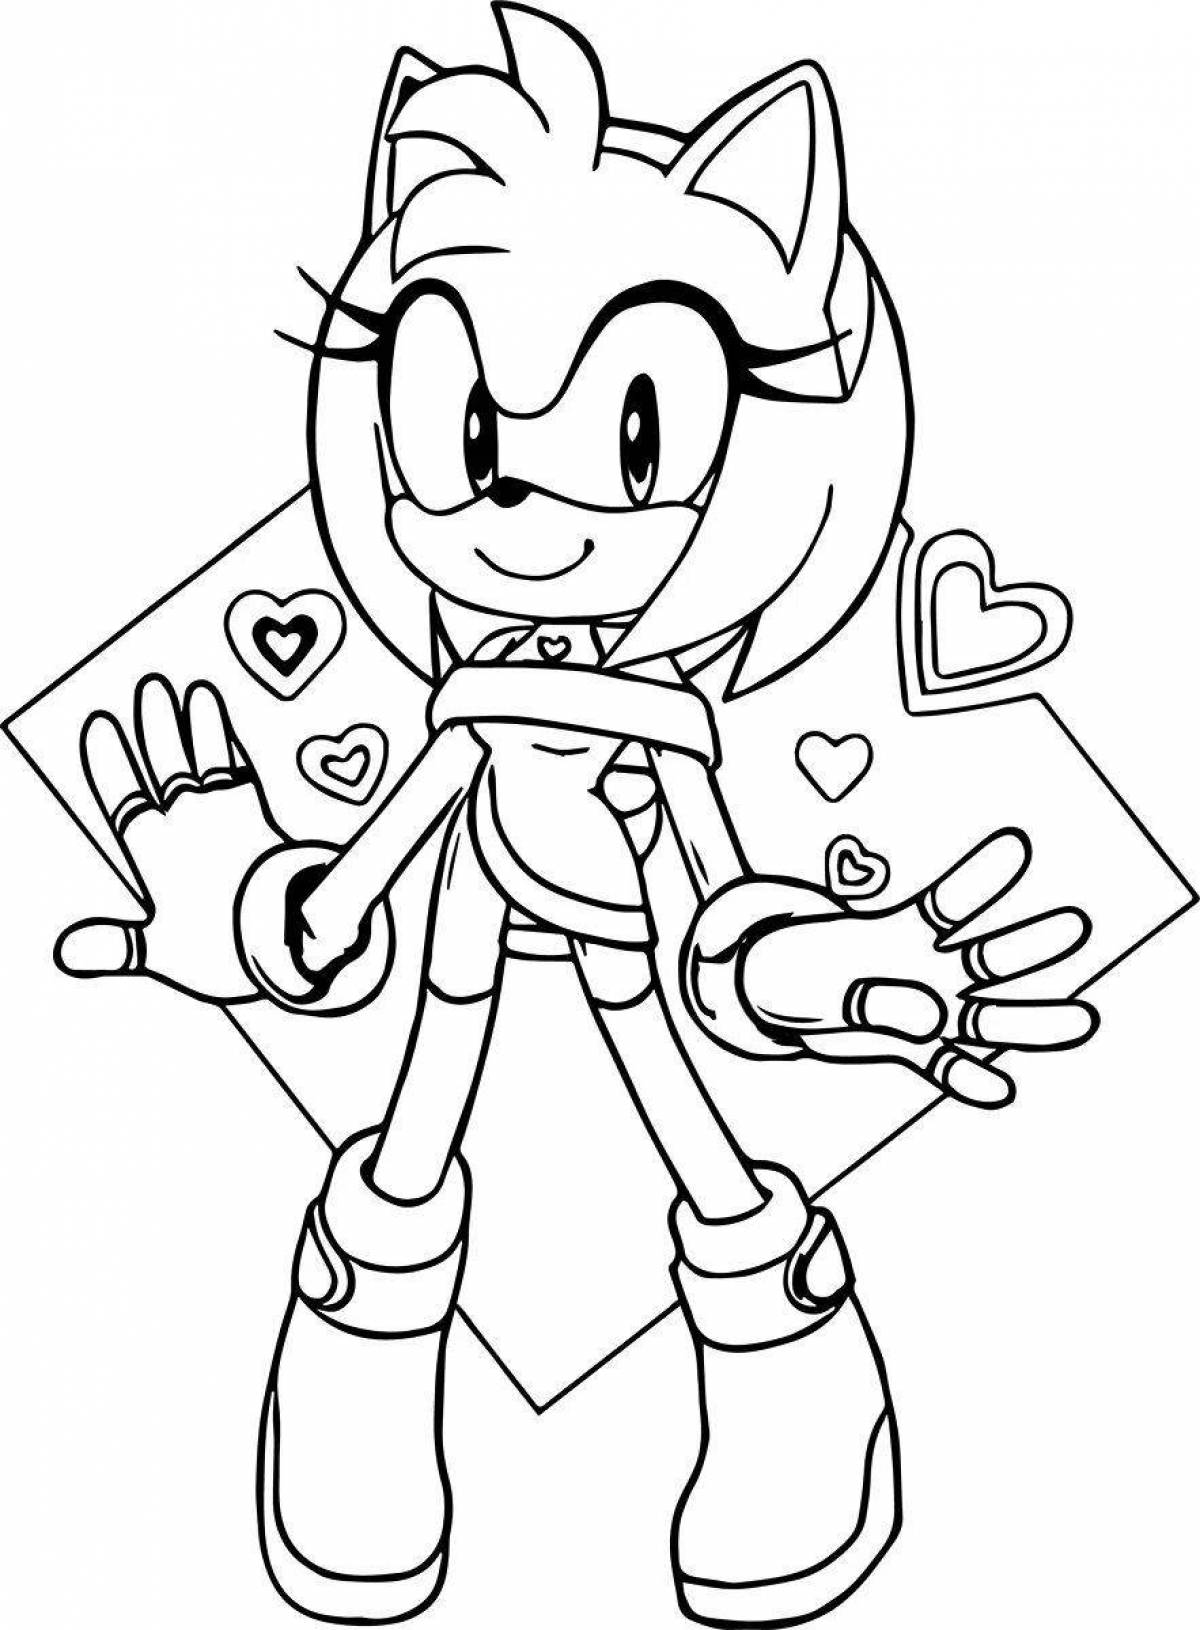 Wonderful xs sonic coloring page